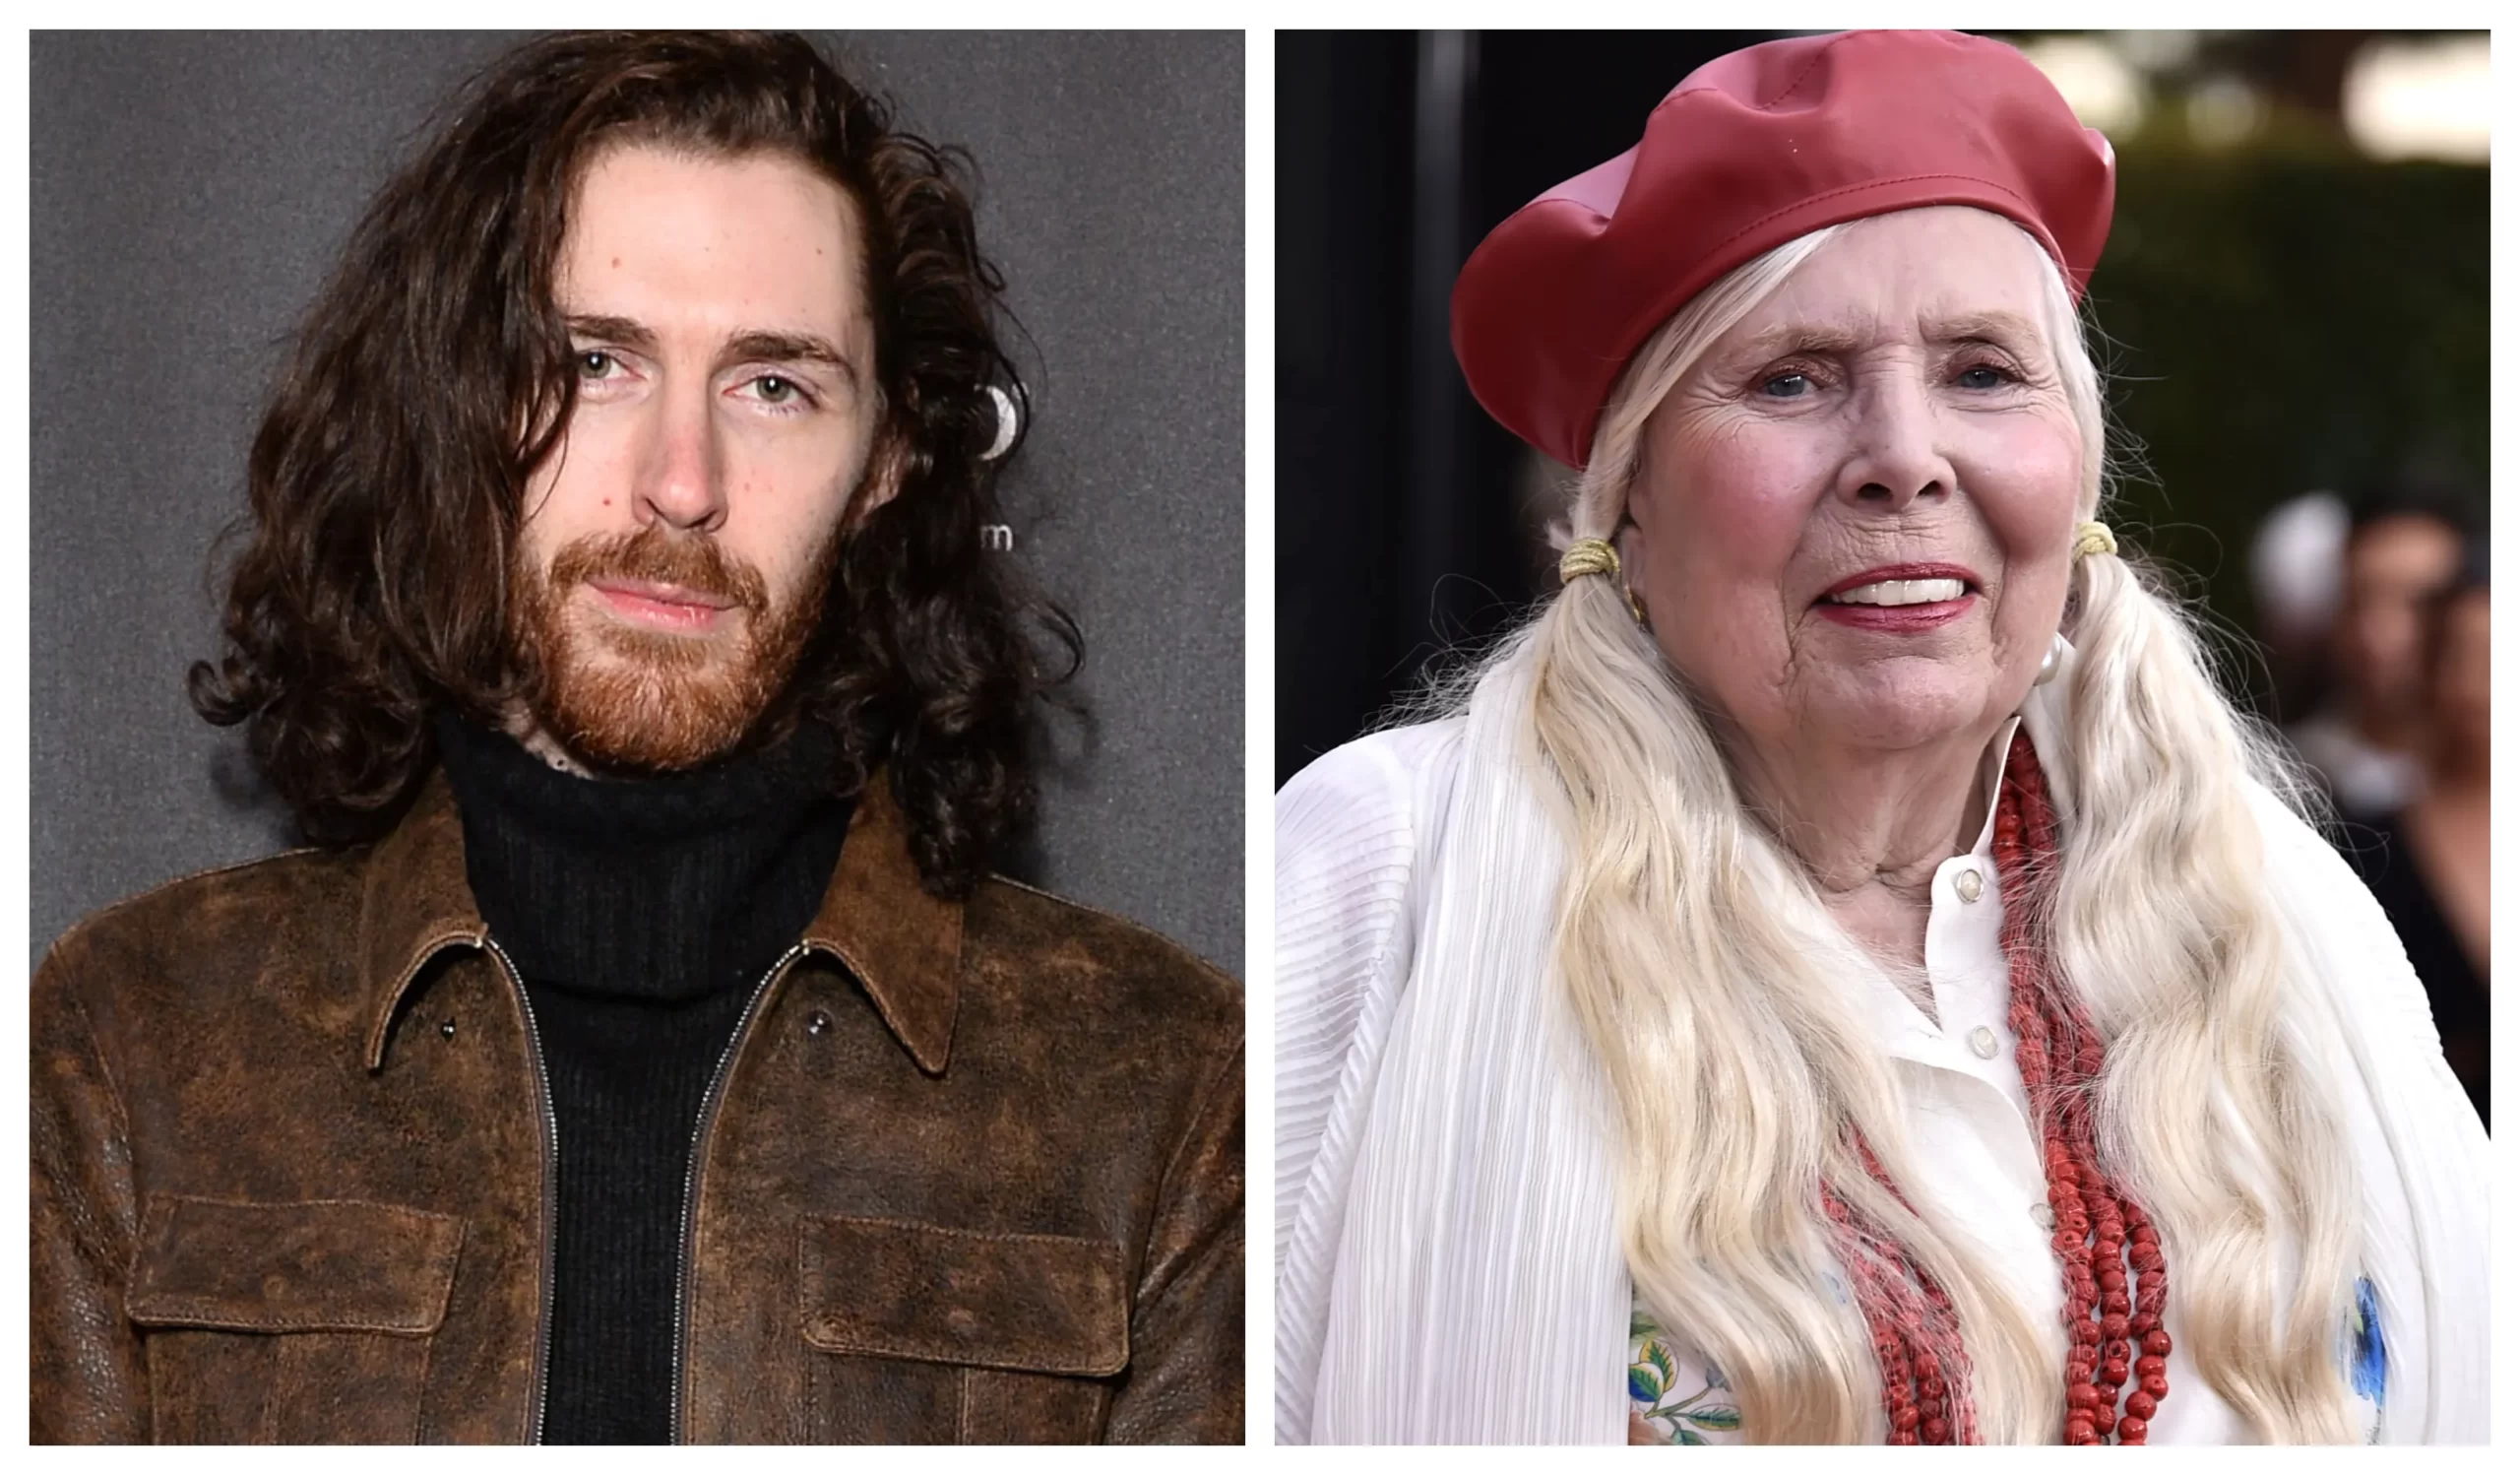 Hozier recalls 'super moving' jam session at Joni Mitchell's house